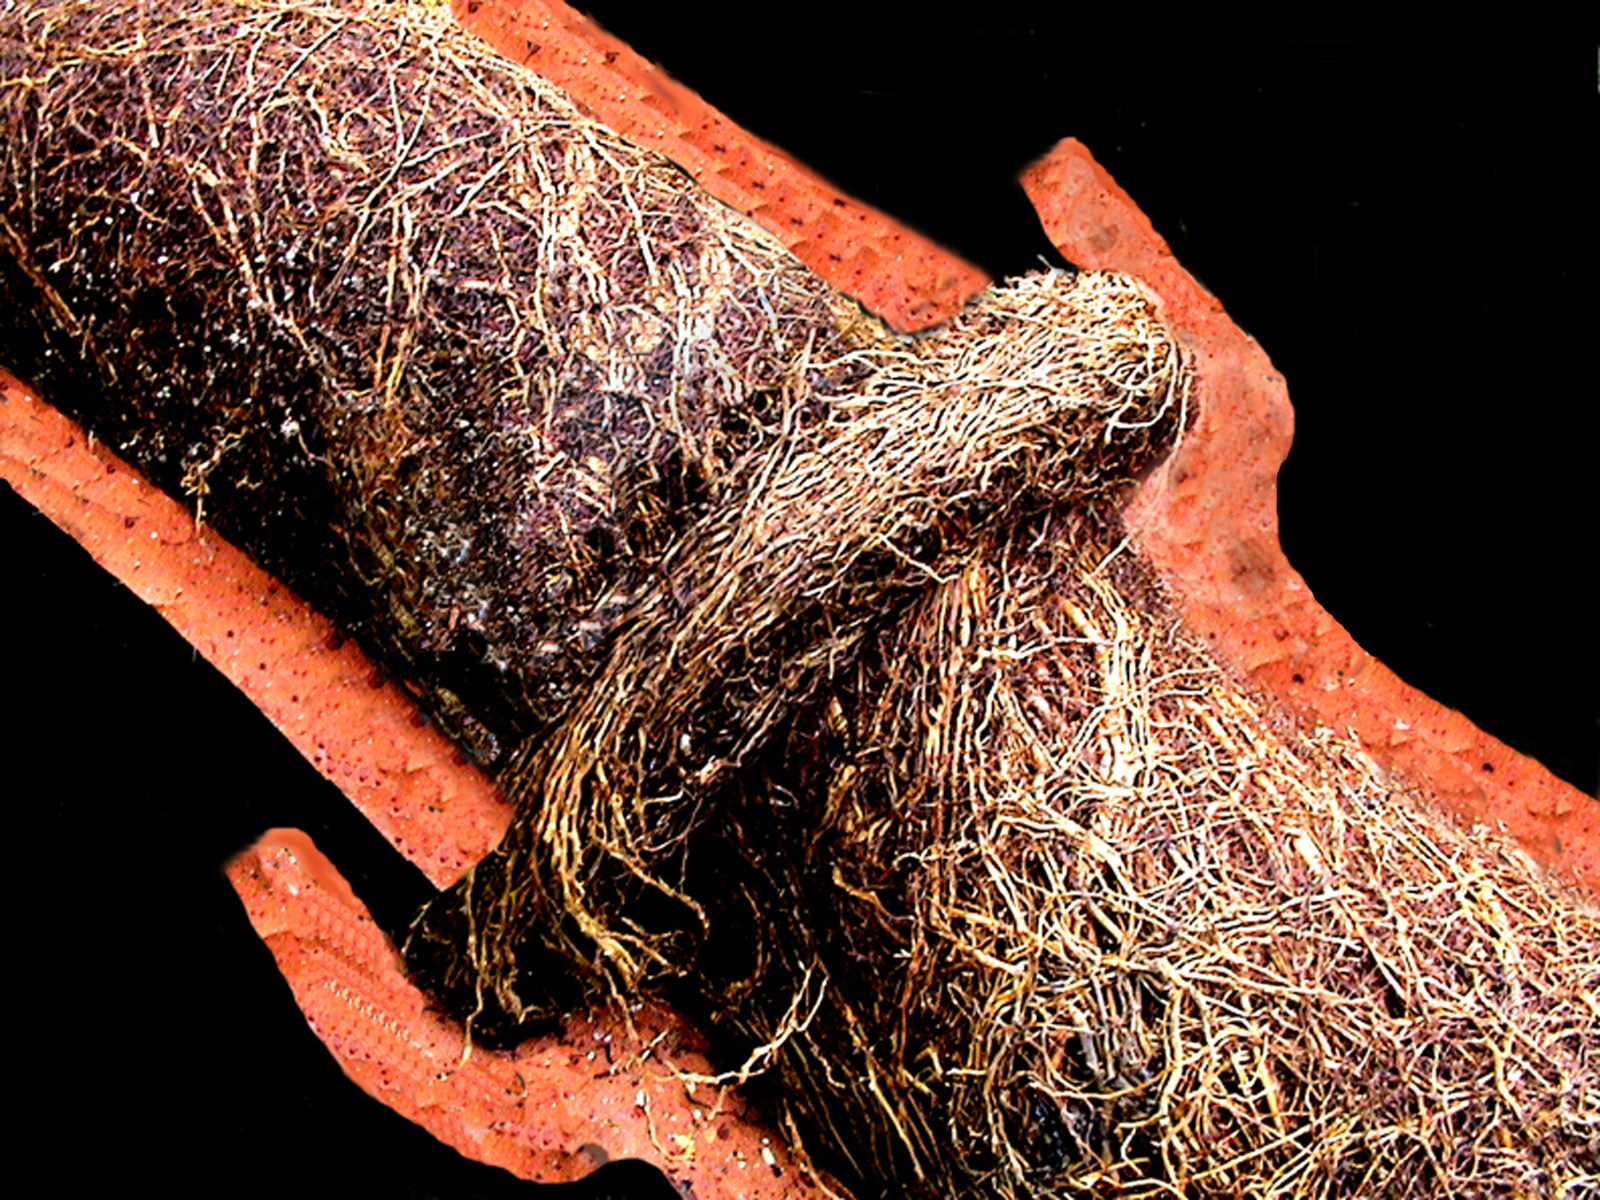  Tree roots commonly infiltrate clay sewer lines at joints 